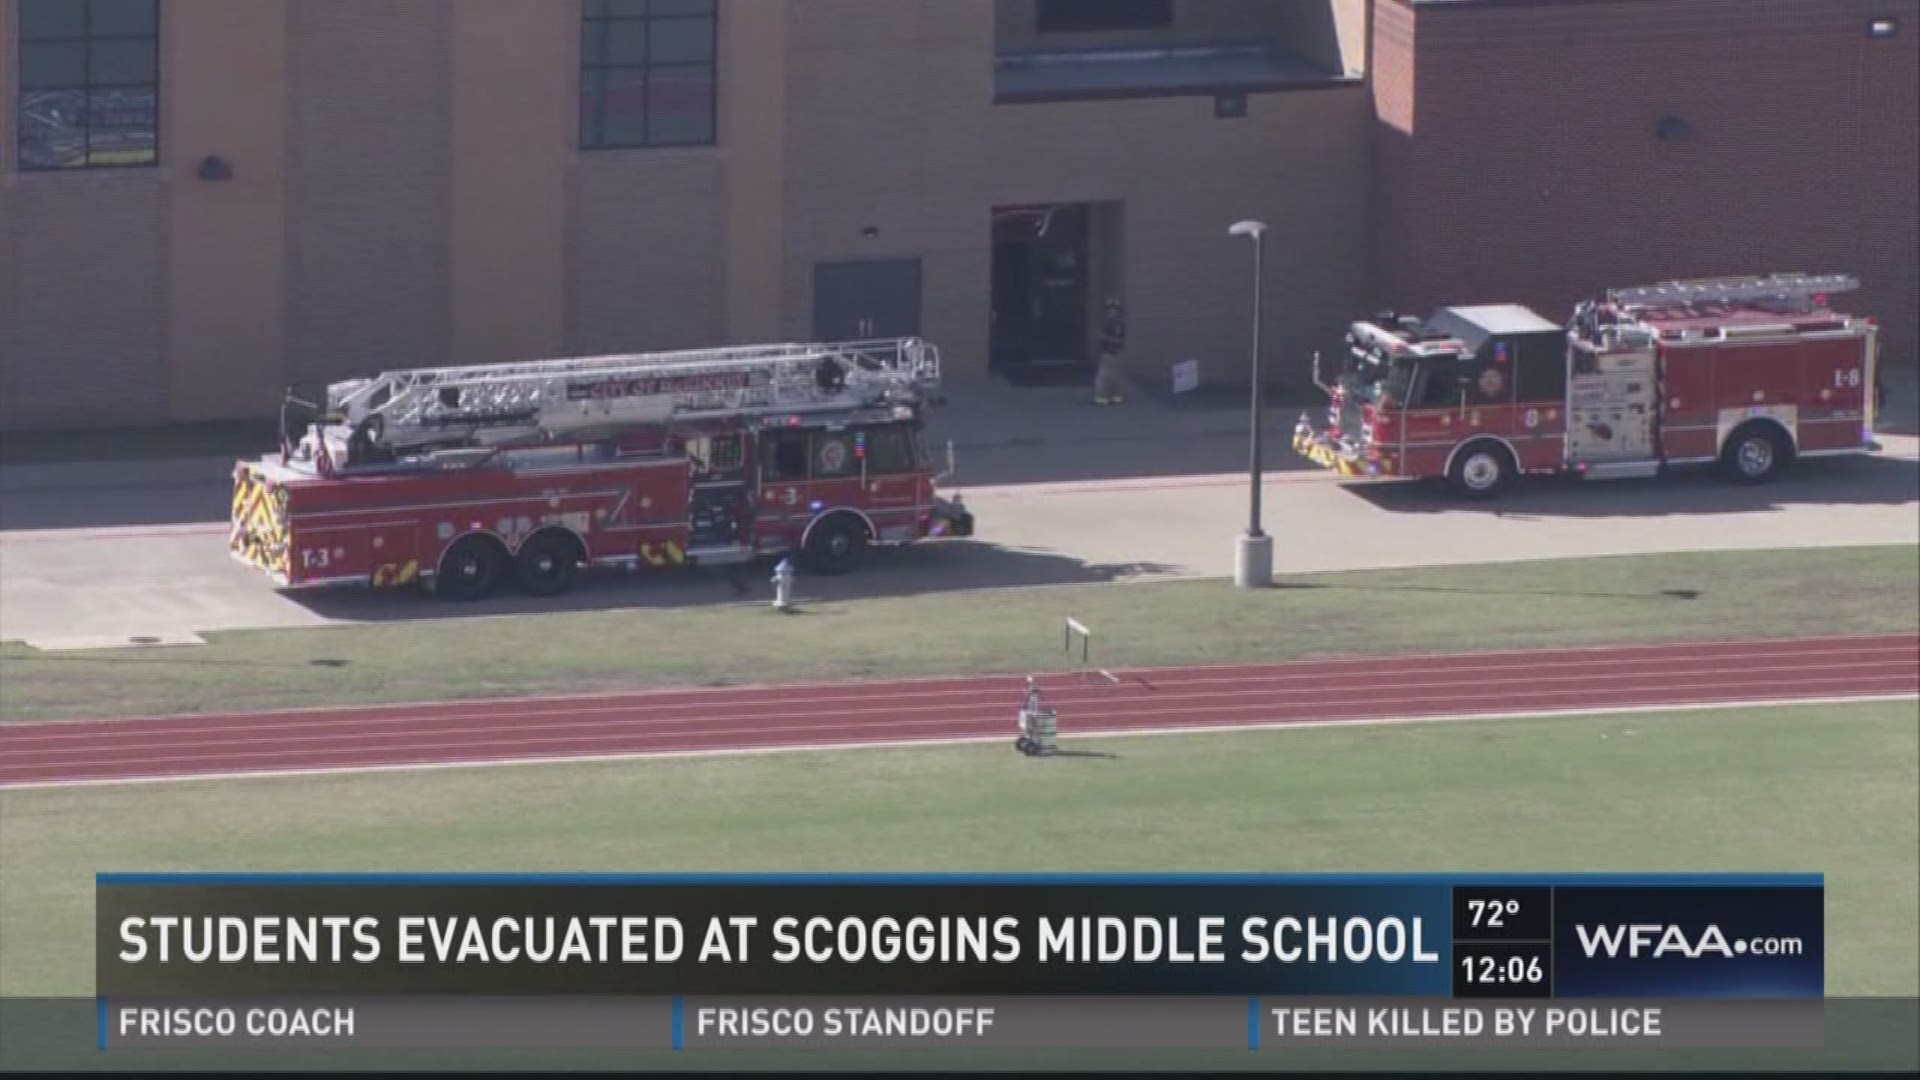 Students evacuated at Scoggins Middle School